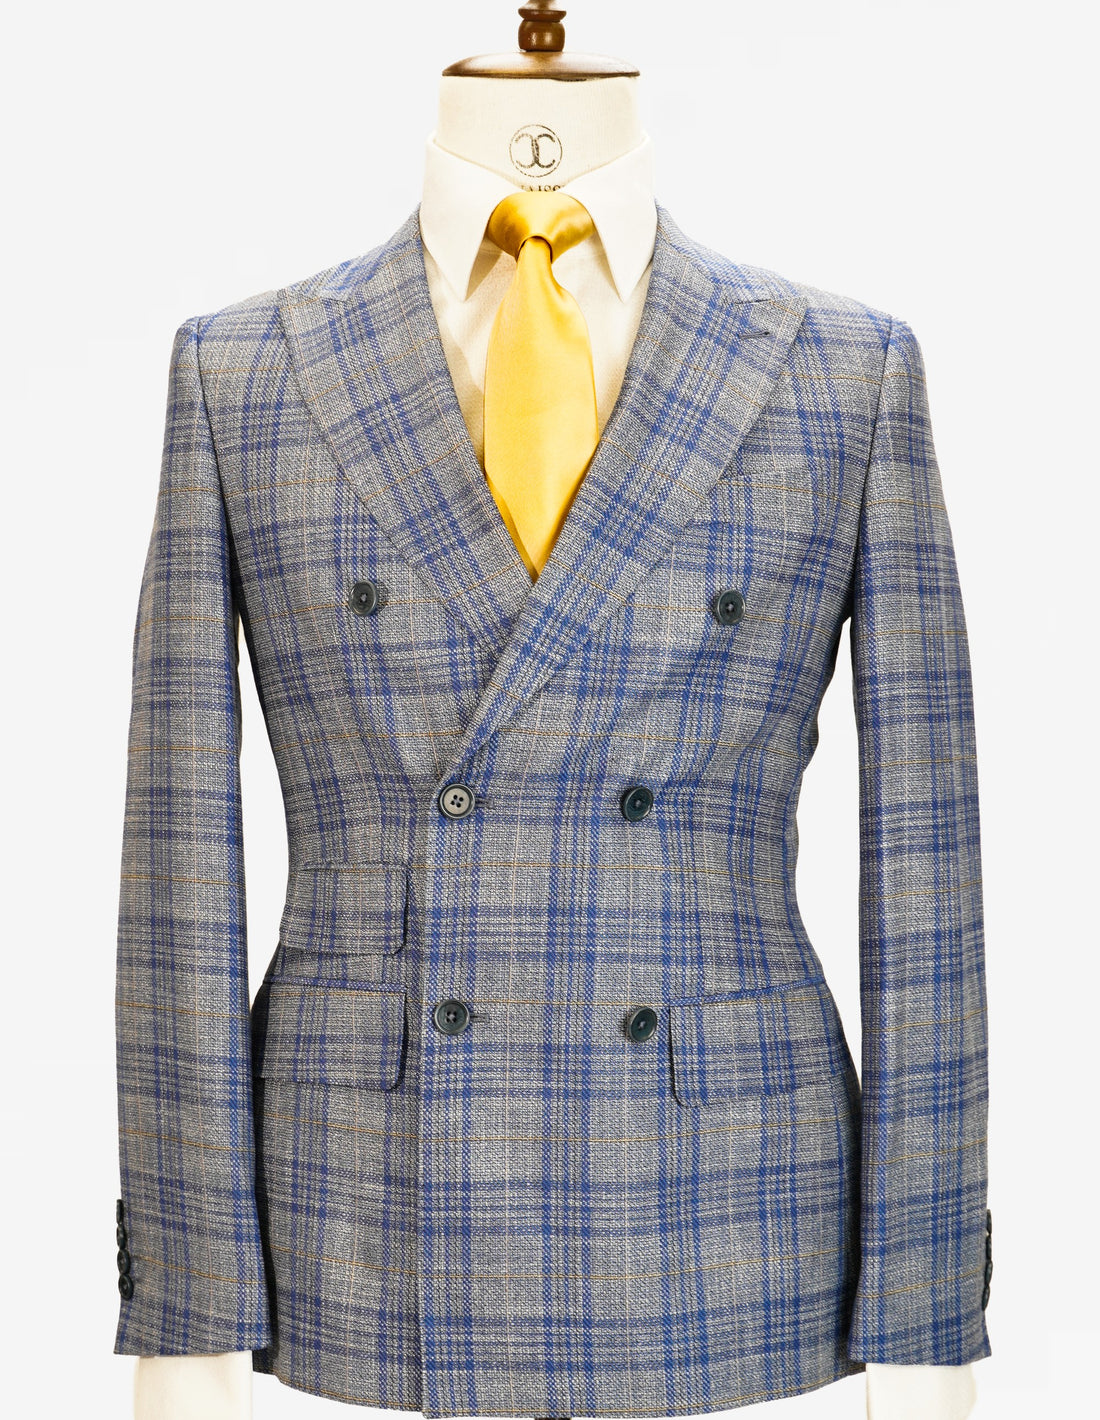 Dormeuil - Light brown with blue and gold tweed check pattern double breasted slim fit suit